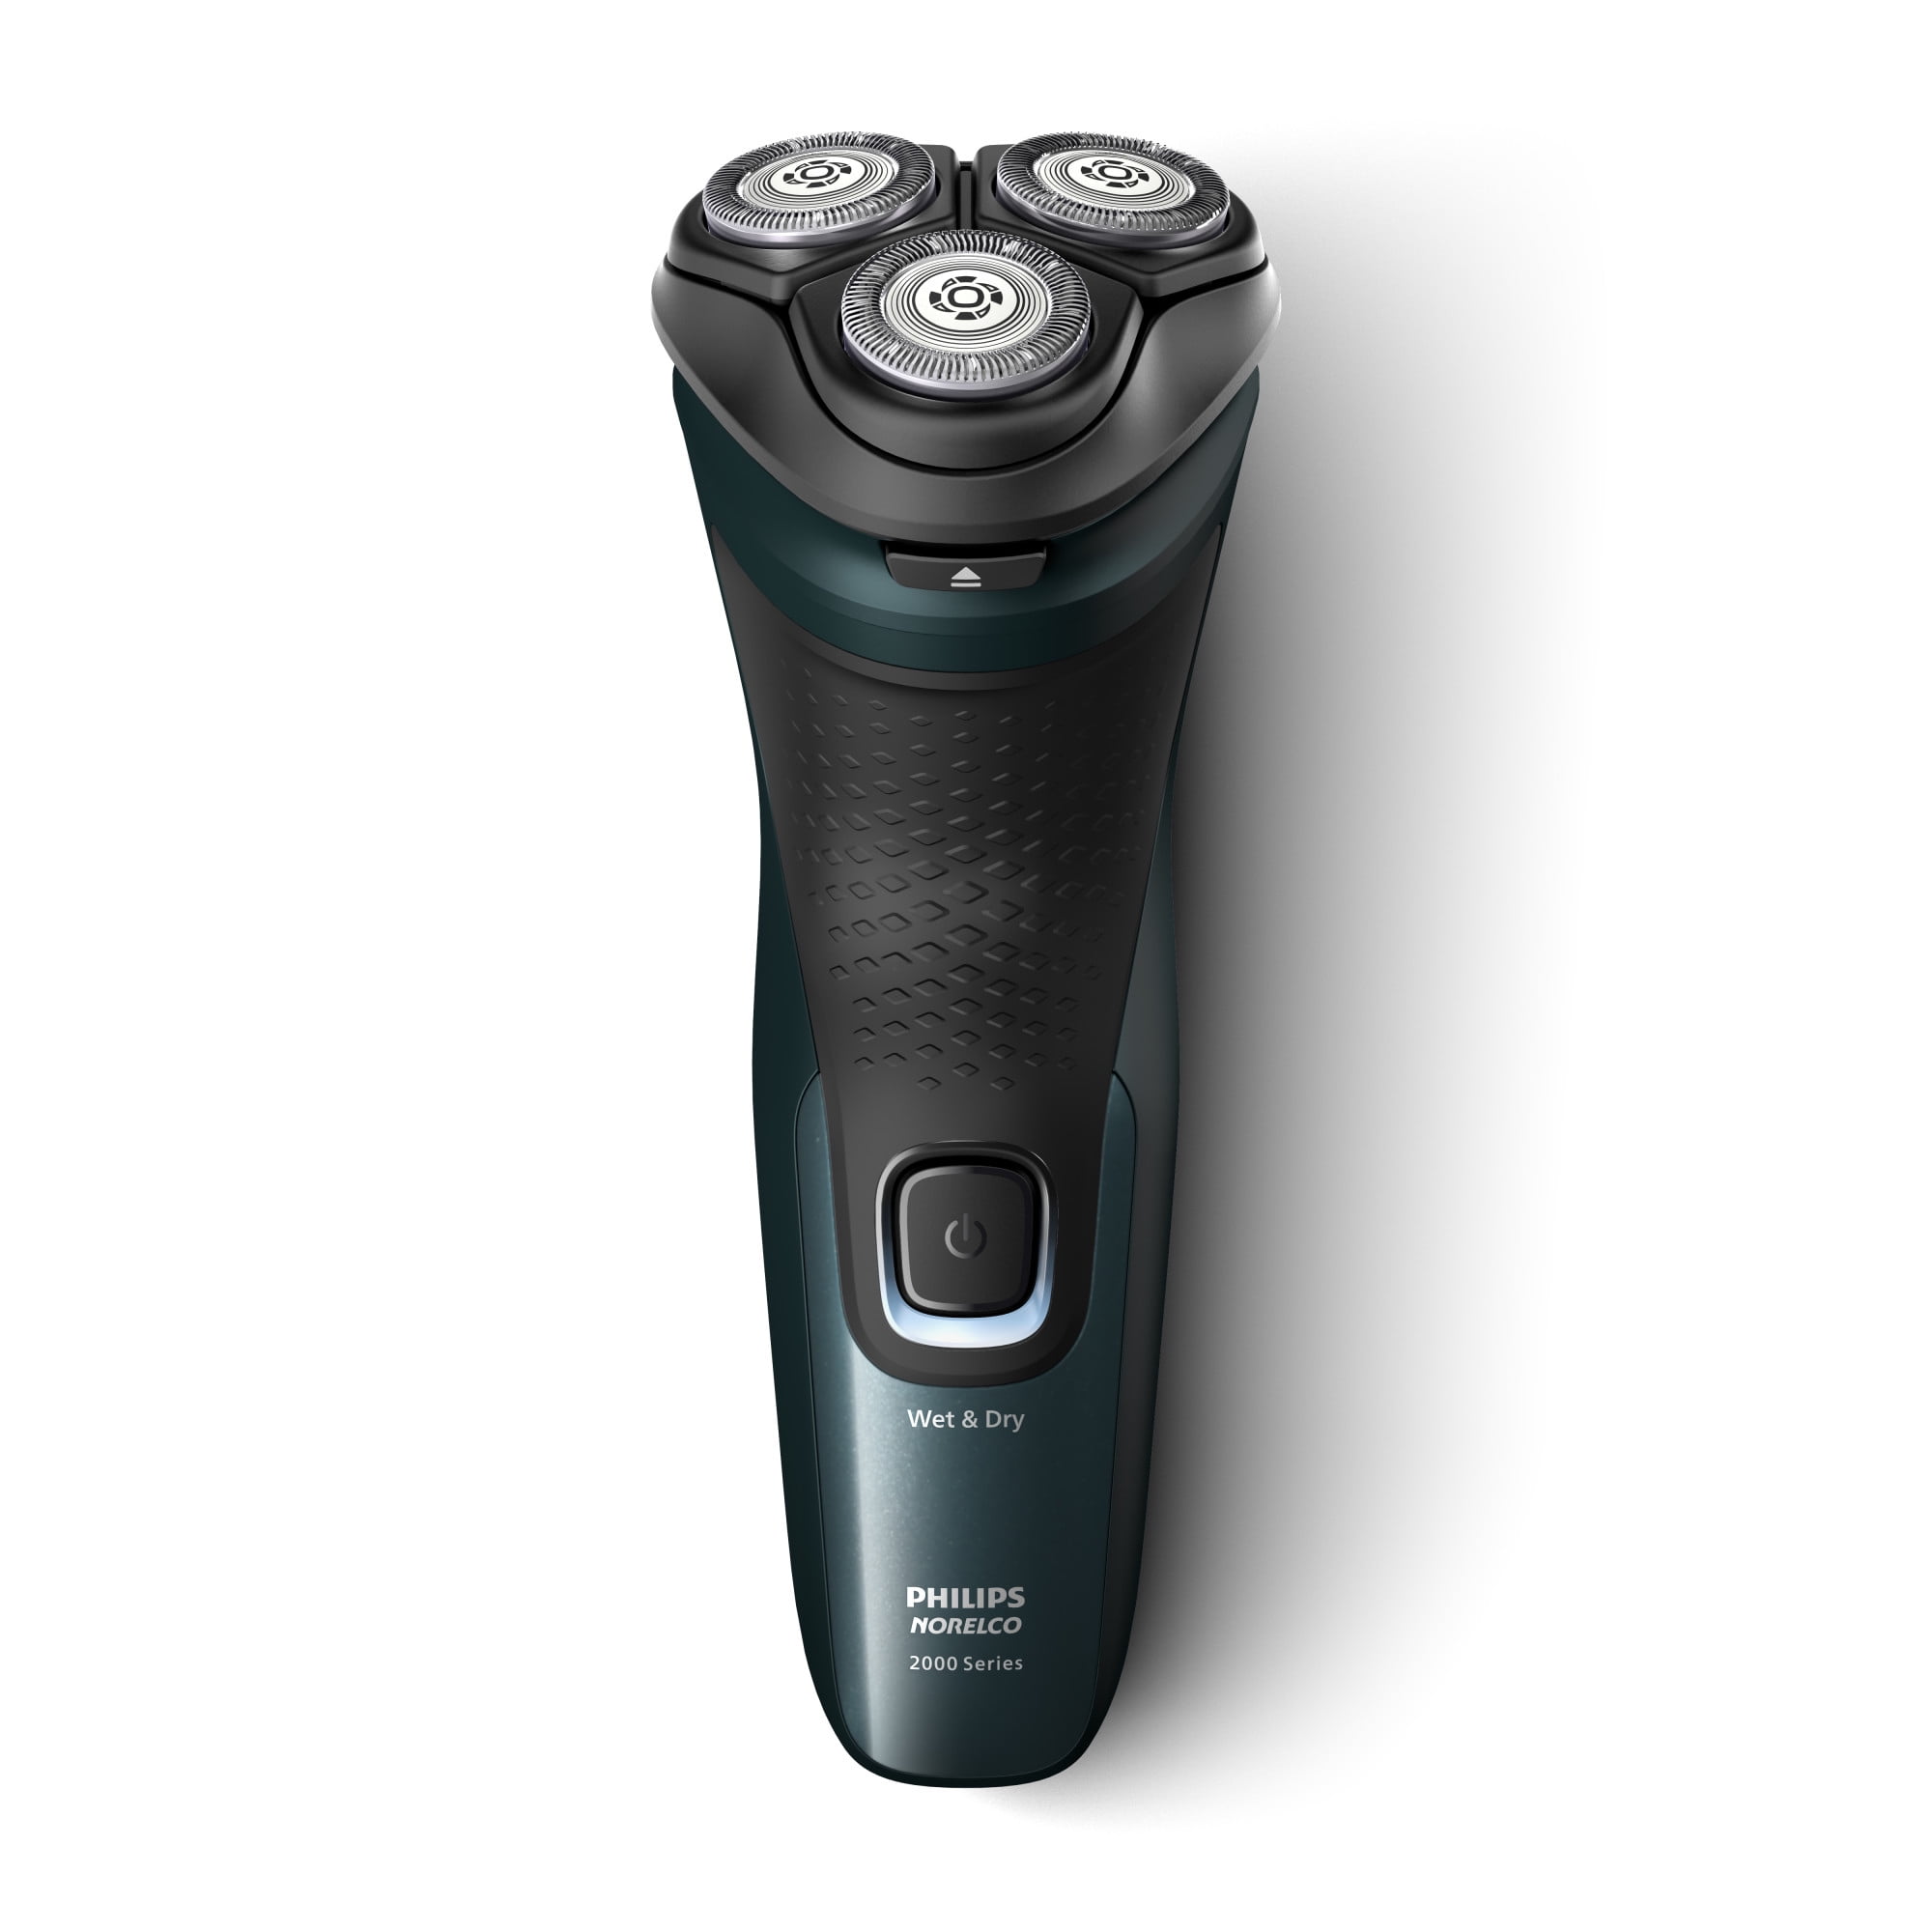 Philips Norelco Shaver 2500, Corded and Rechargeable Cordless Electric  Shaver with Pop-Up Trimmer, S1311/82